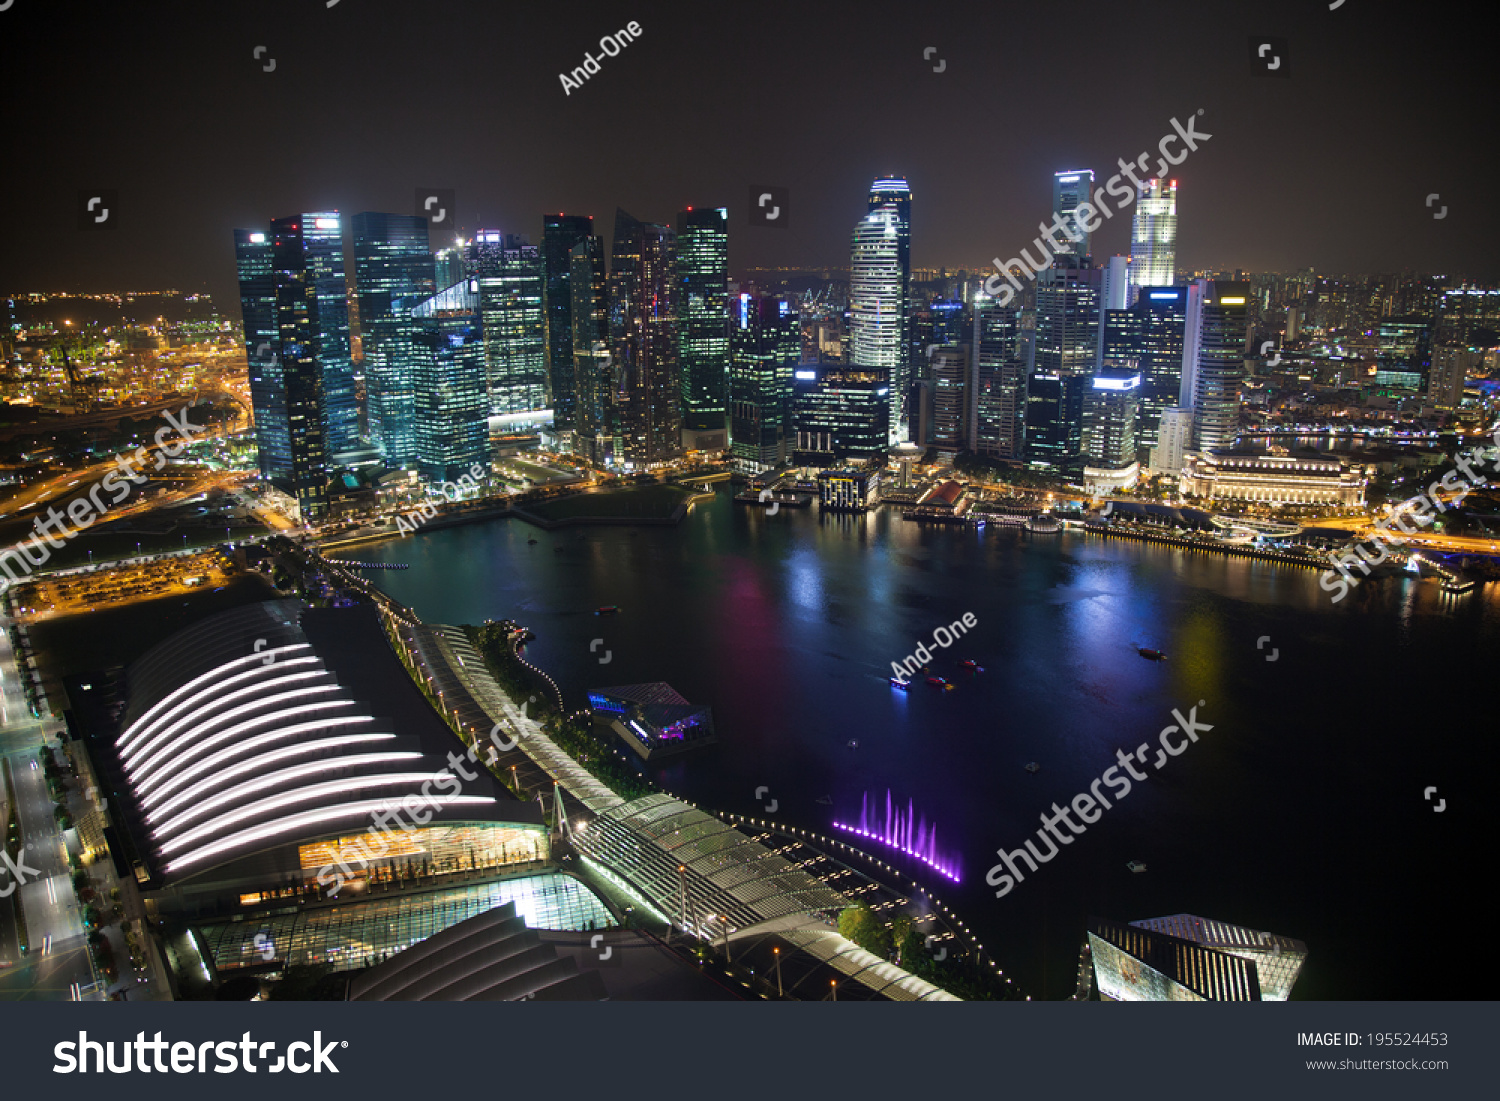 Skyscrapers in Singapore's business centre at night #195524453